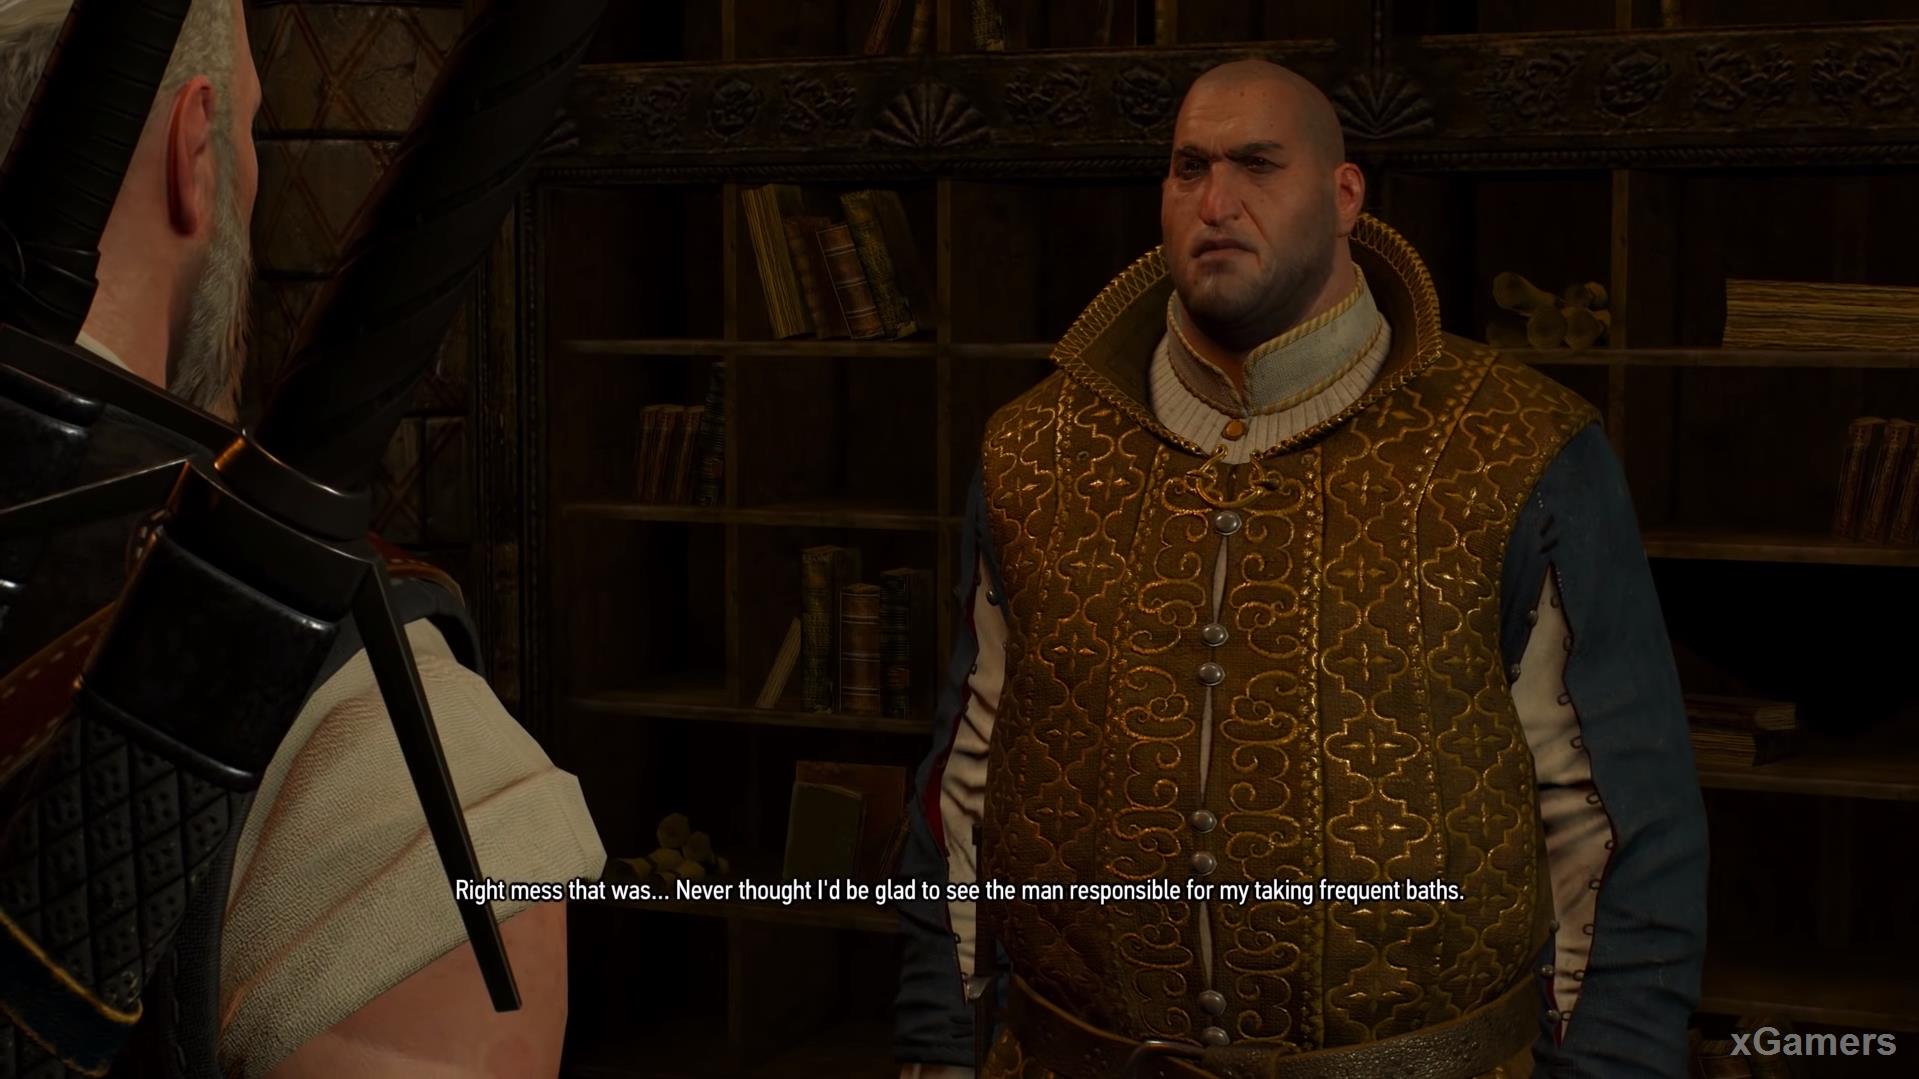 The dialogue will allow you to remember the history of Dating the Witcher and the redan spy, as well as their difficult relationship